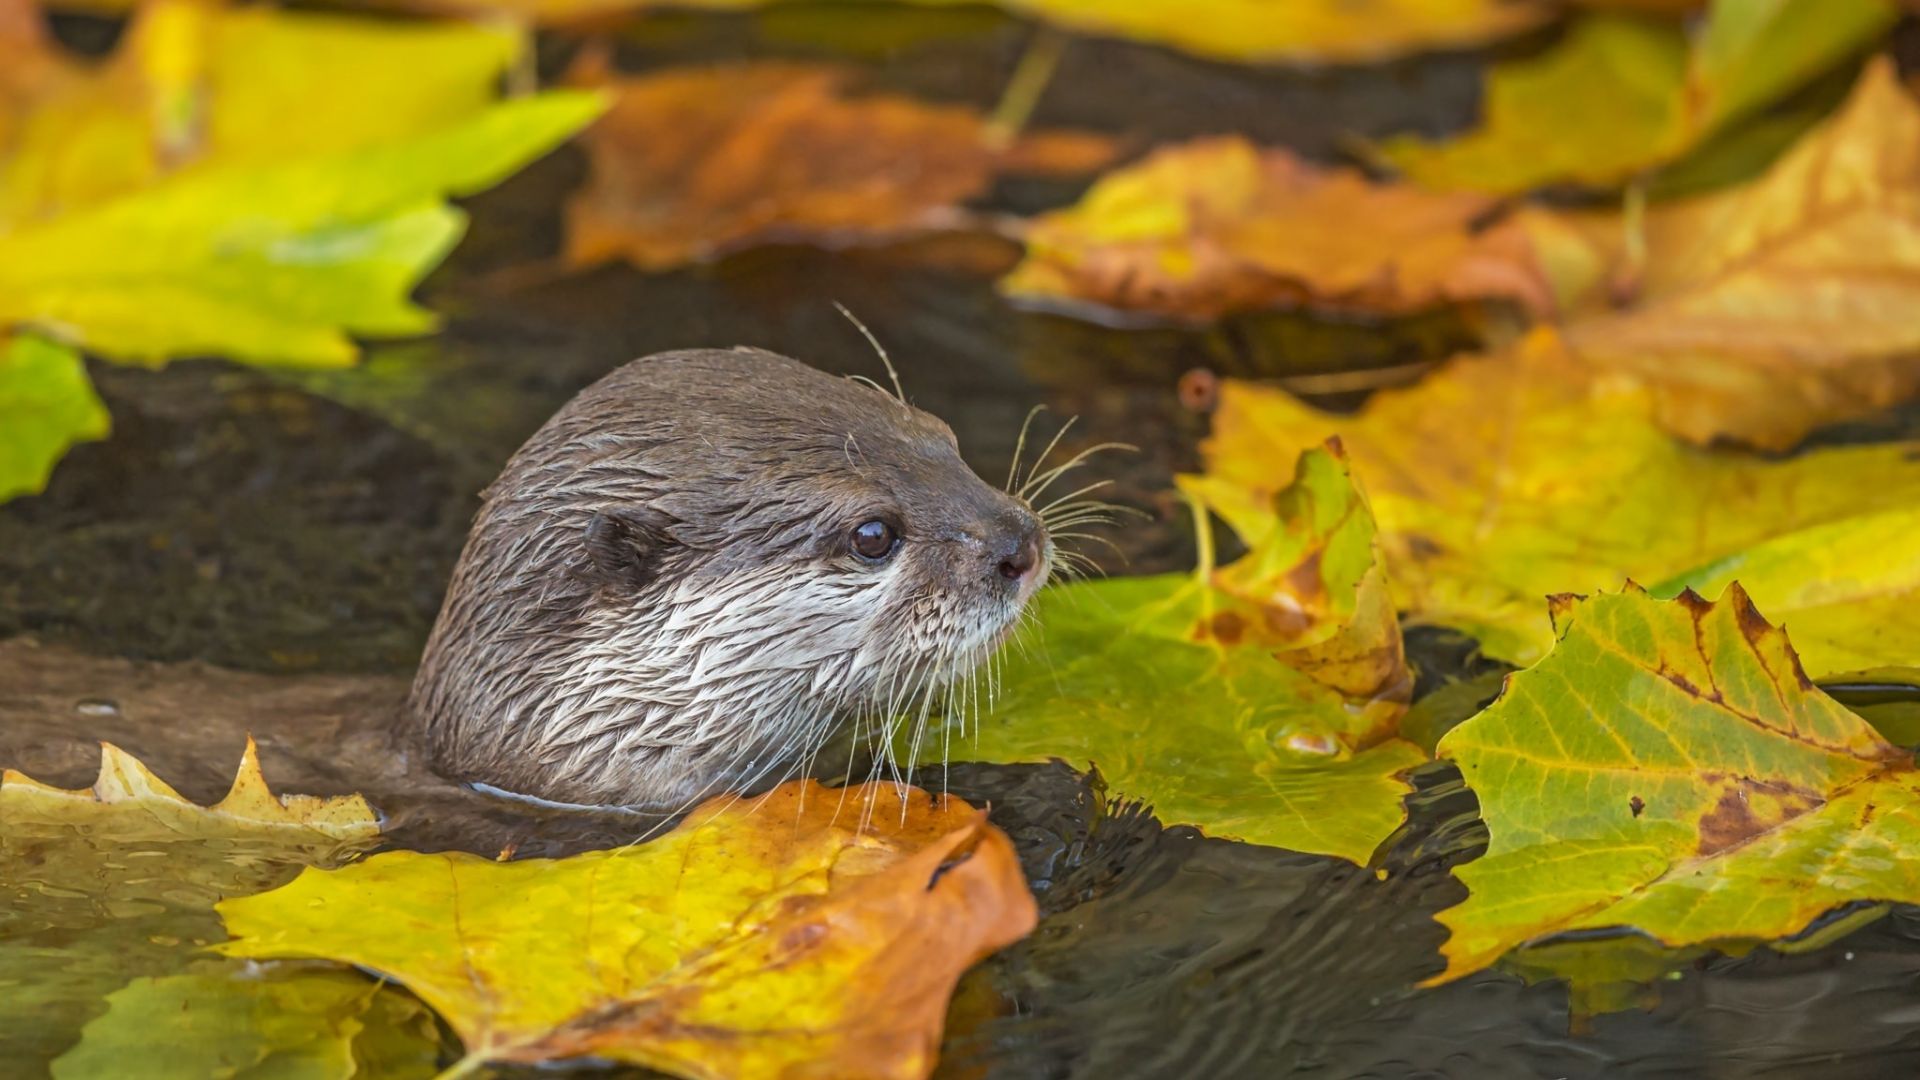 Cute Otter Background Images HD Pictures and Wallpaper For Free Download   Pngtree